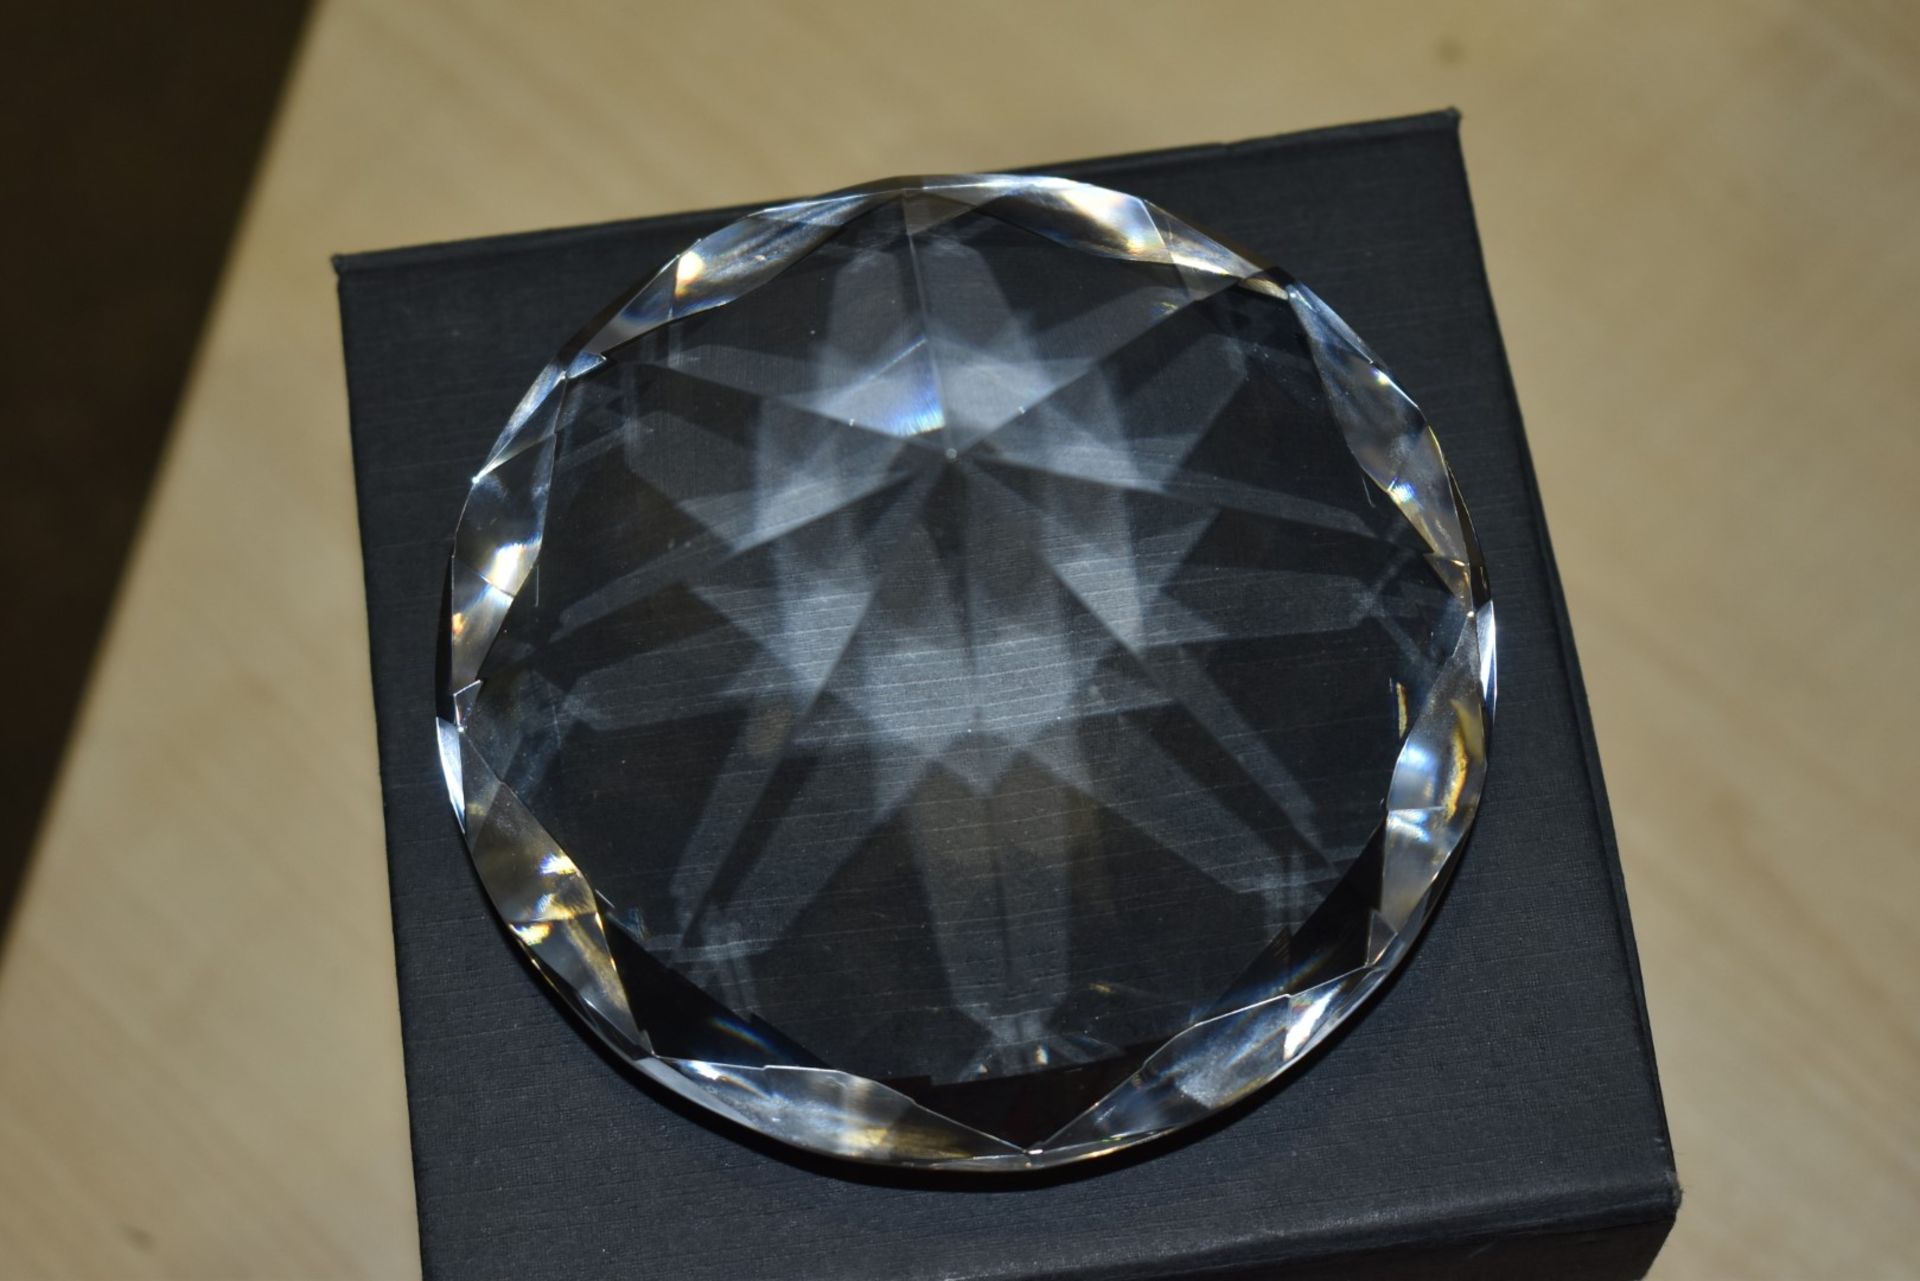 3 x Ice London Faux Diamond Paperweights - New and Boxed - Ref: In2128 wh1 pal1 - CL011 - - Image 5 of 8